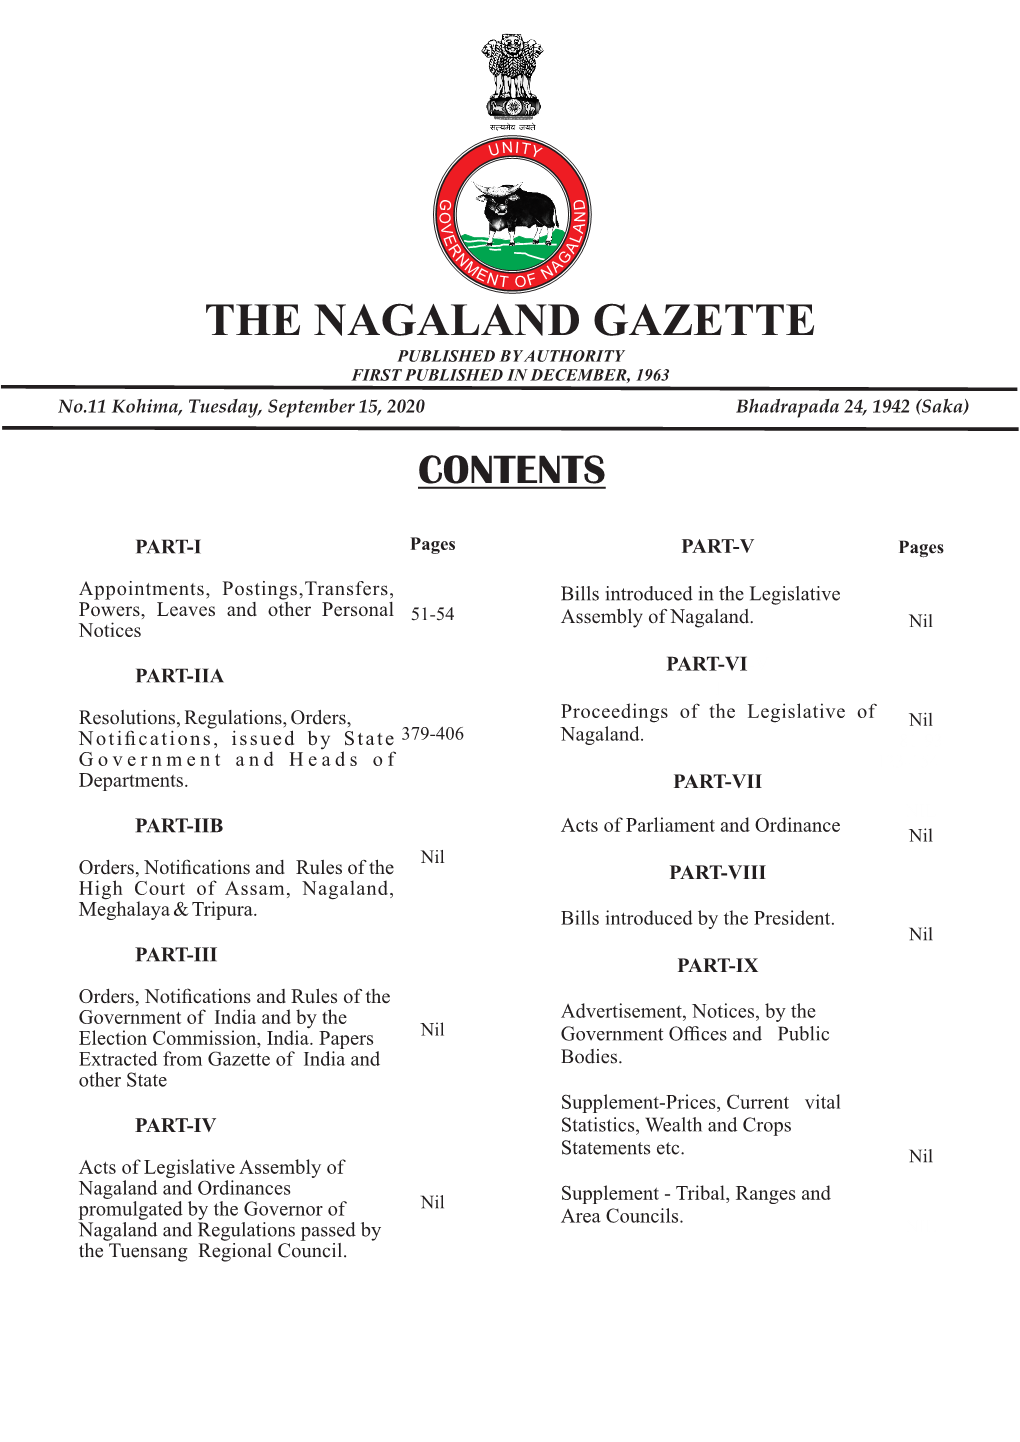 THE NAGALAND GAZETTE PUBLISHED by AUTHORITY FIRST PUBLISHED in DECEMBER, 1963 No.11 Kohima, Tuesday, September 15, 2020 Bhadrapada 24, 1942 (Saka) CONTENTS